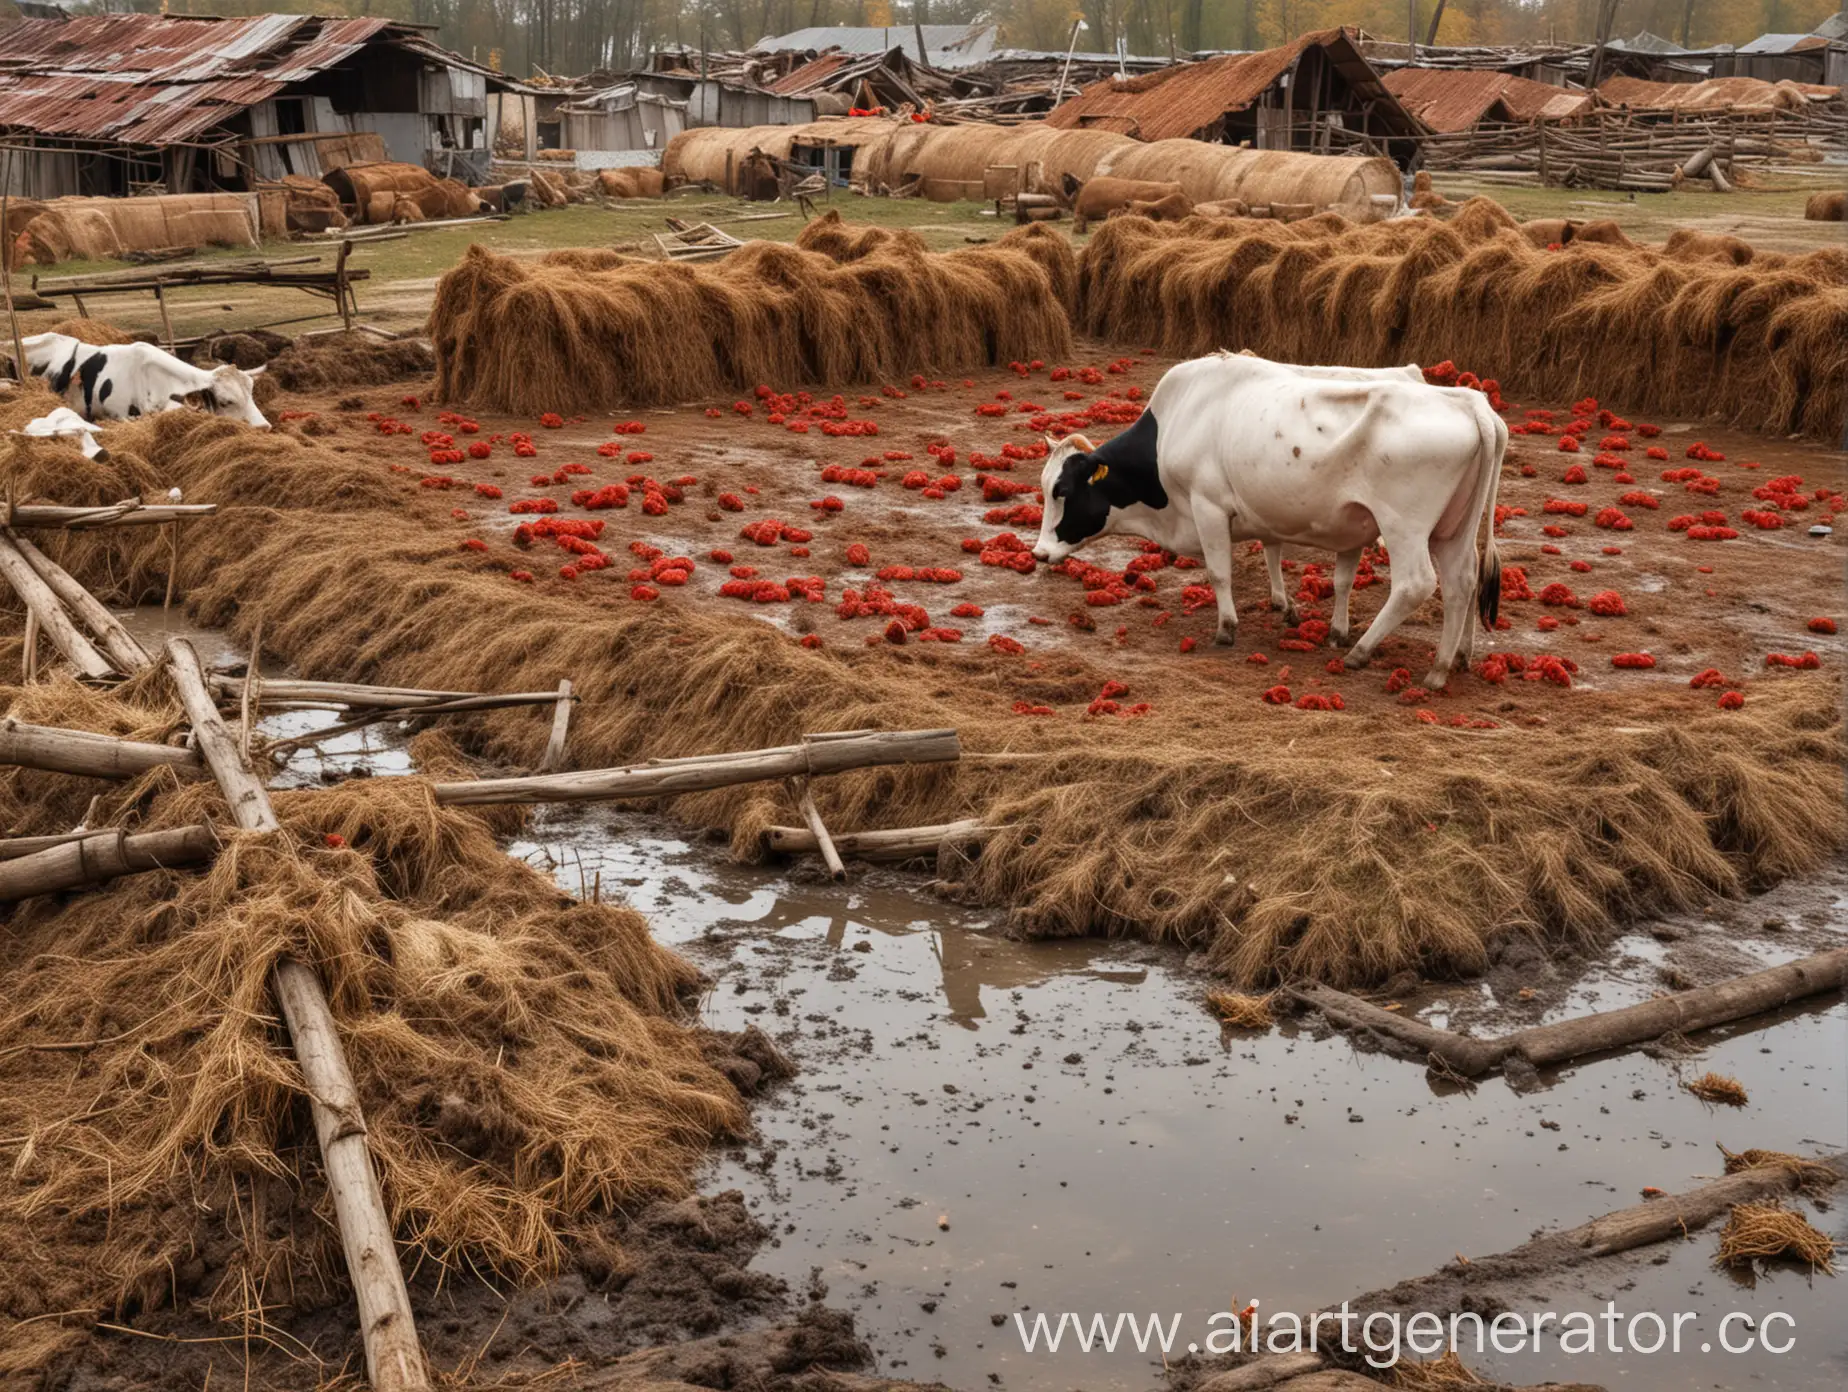 Decaying-Farm-with-Red-Flagged-Rooftops-and-Skinny-Cows-Eating-Dirt